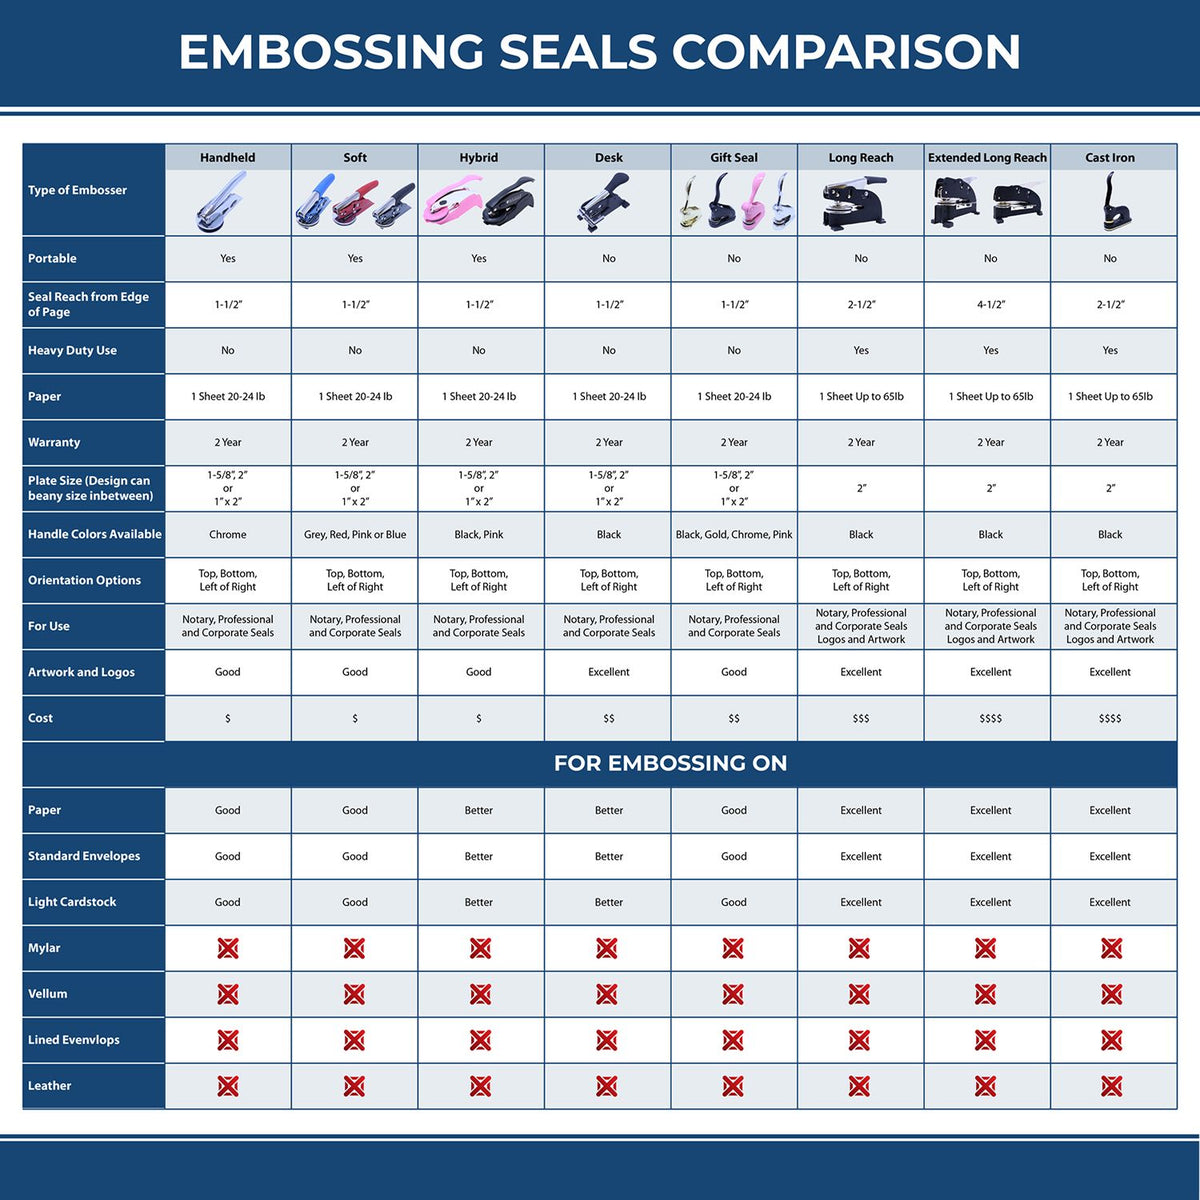 A comparison chart for the different types of mount models available for the Handheld North Carolina Professional Engineer Embosser.